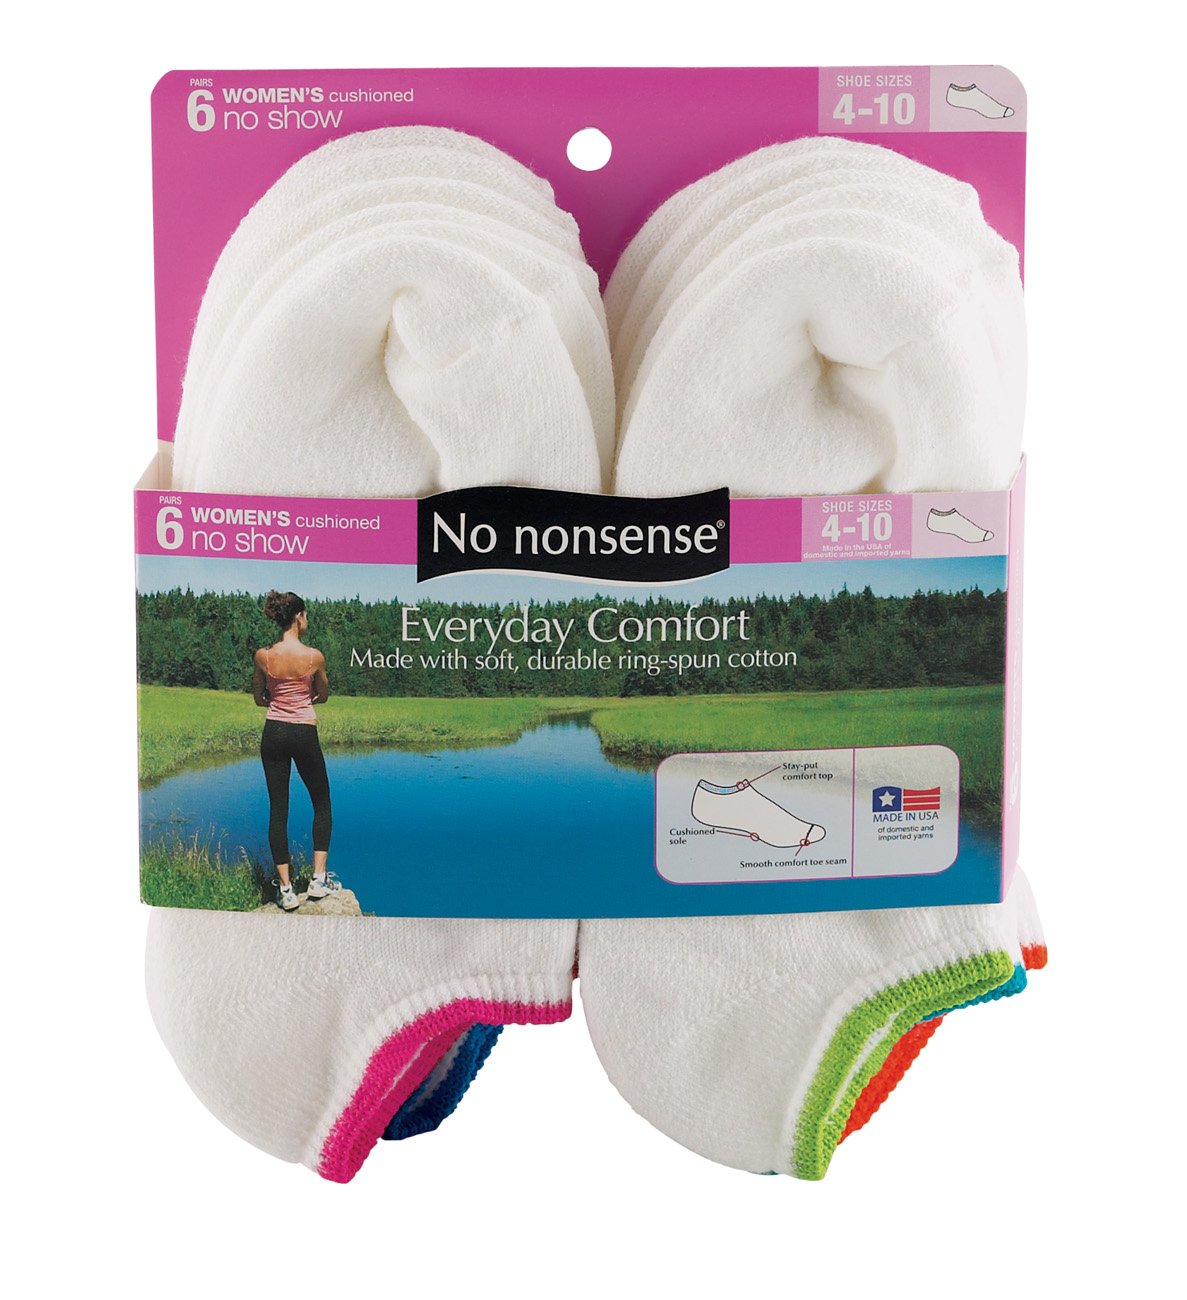 No Nonsense Everyday Comfort Women's No Show Assorted Color Socks, 4-10 Size